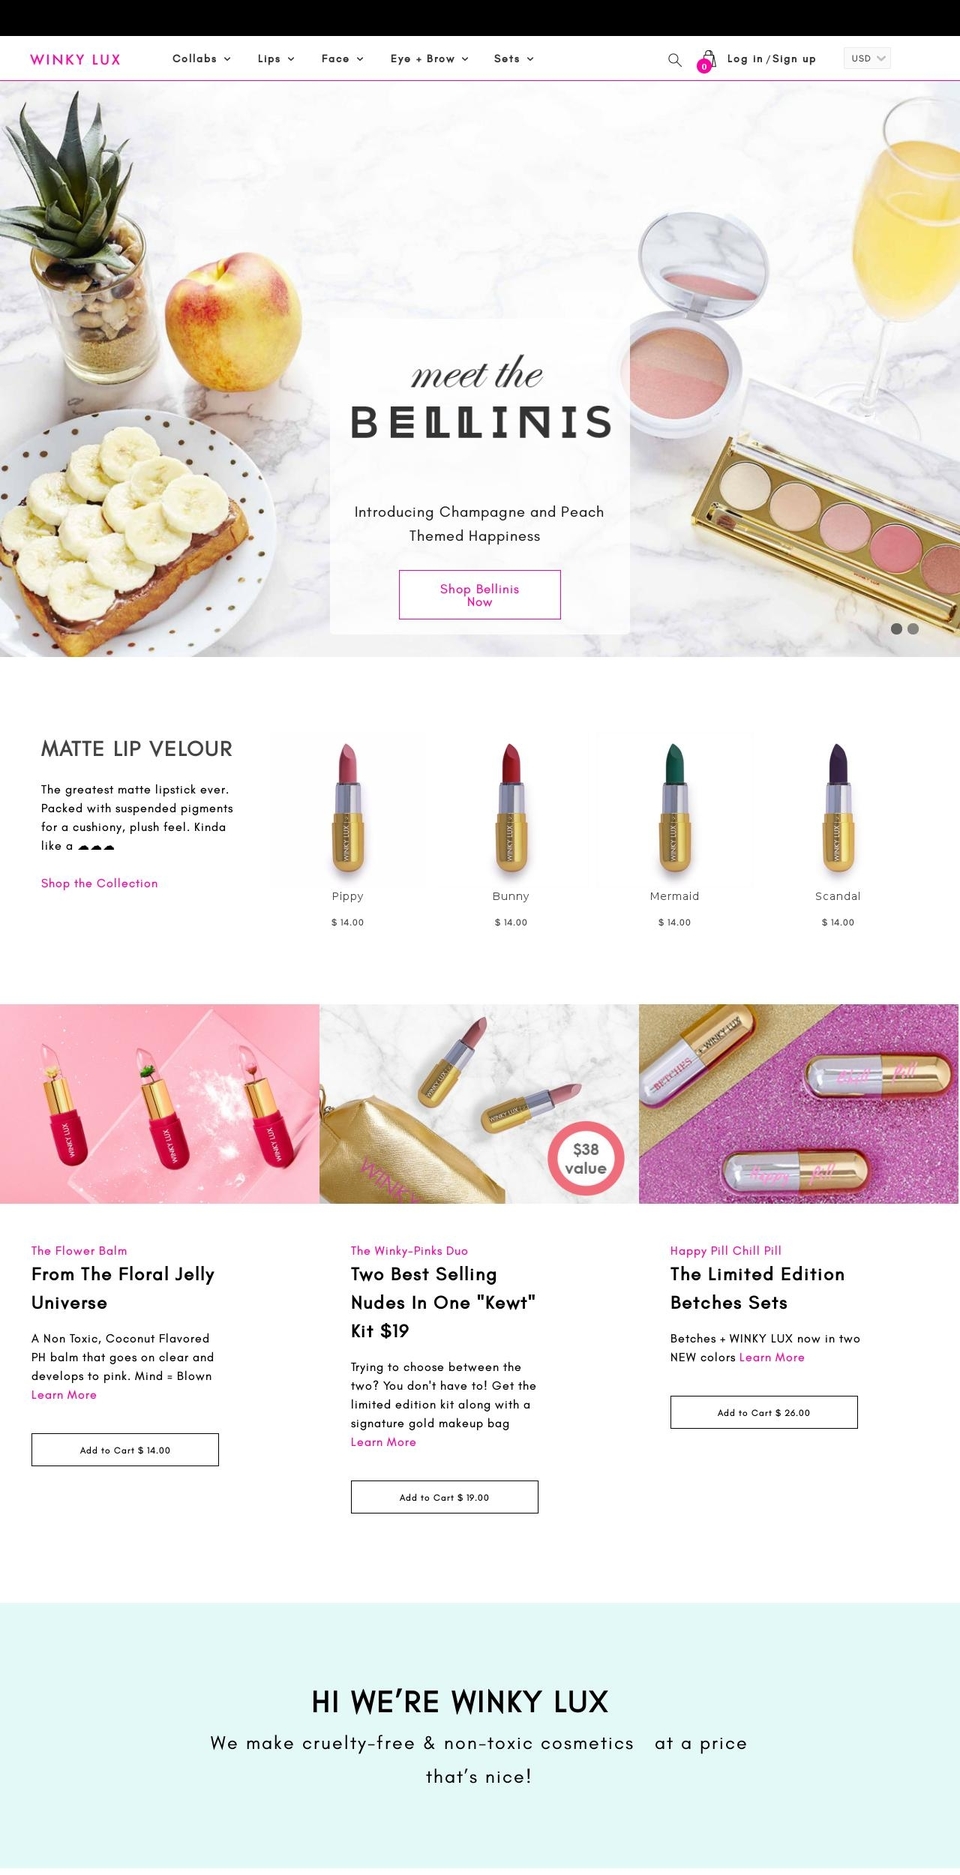 Production Shopify theme site example winkylux.com